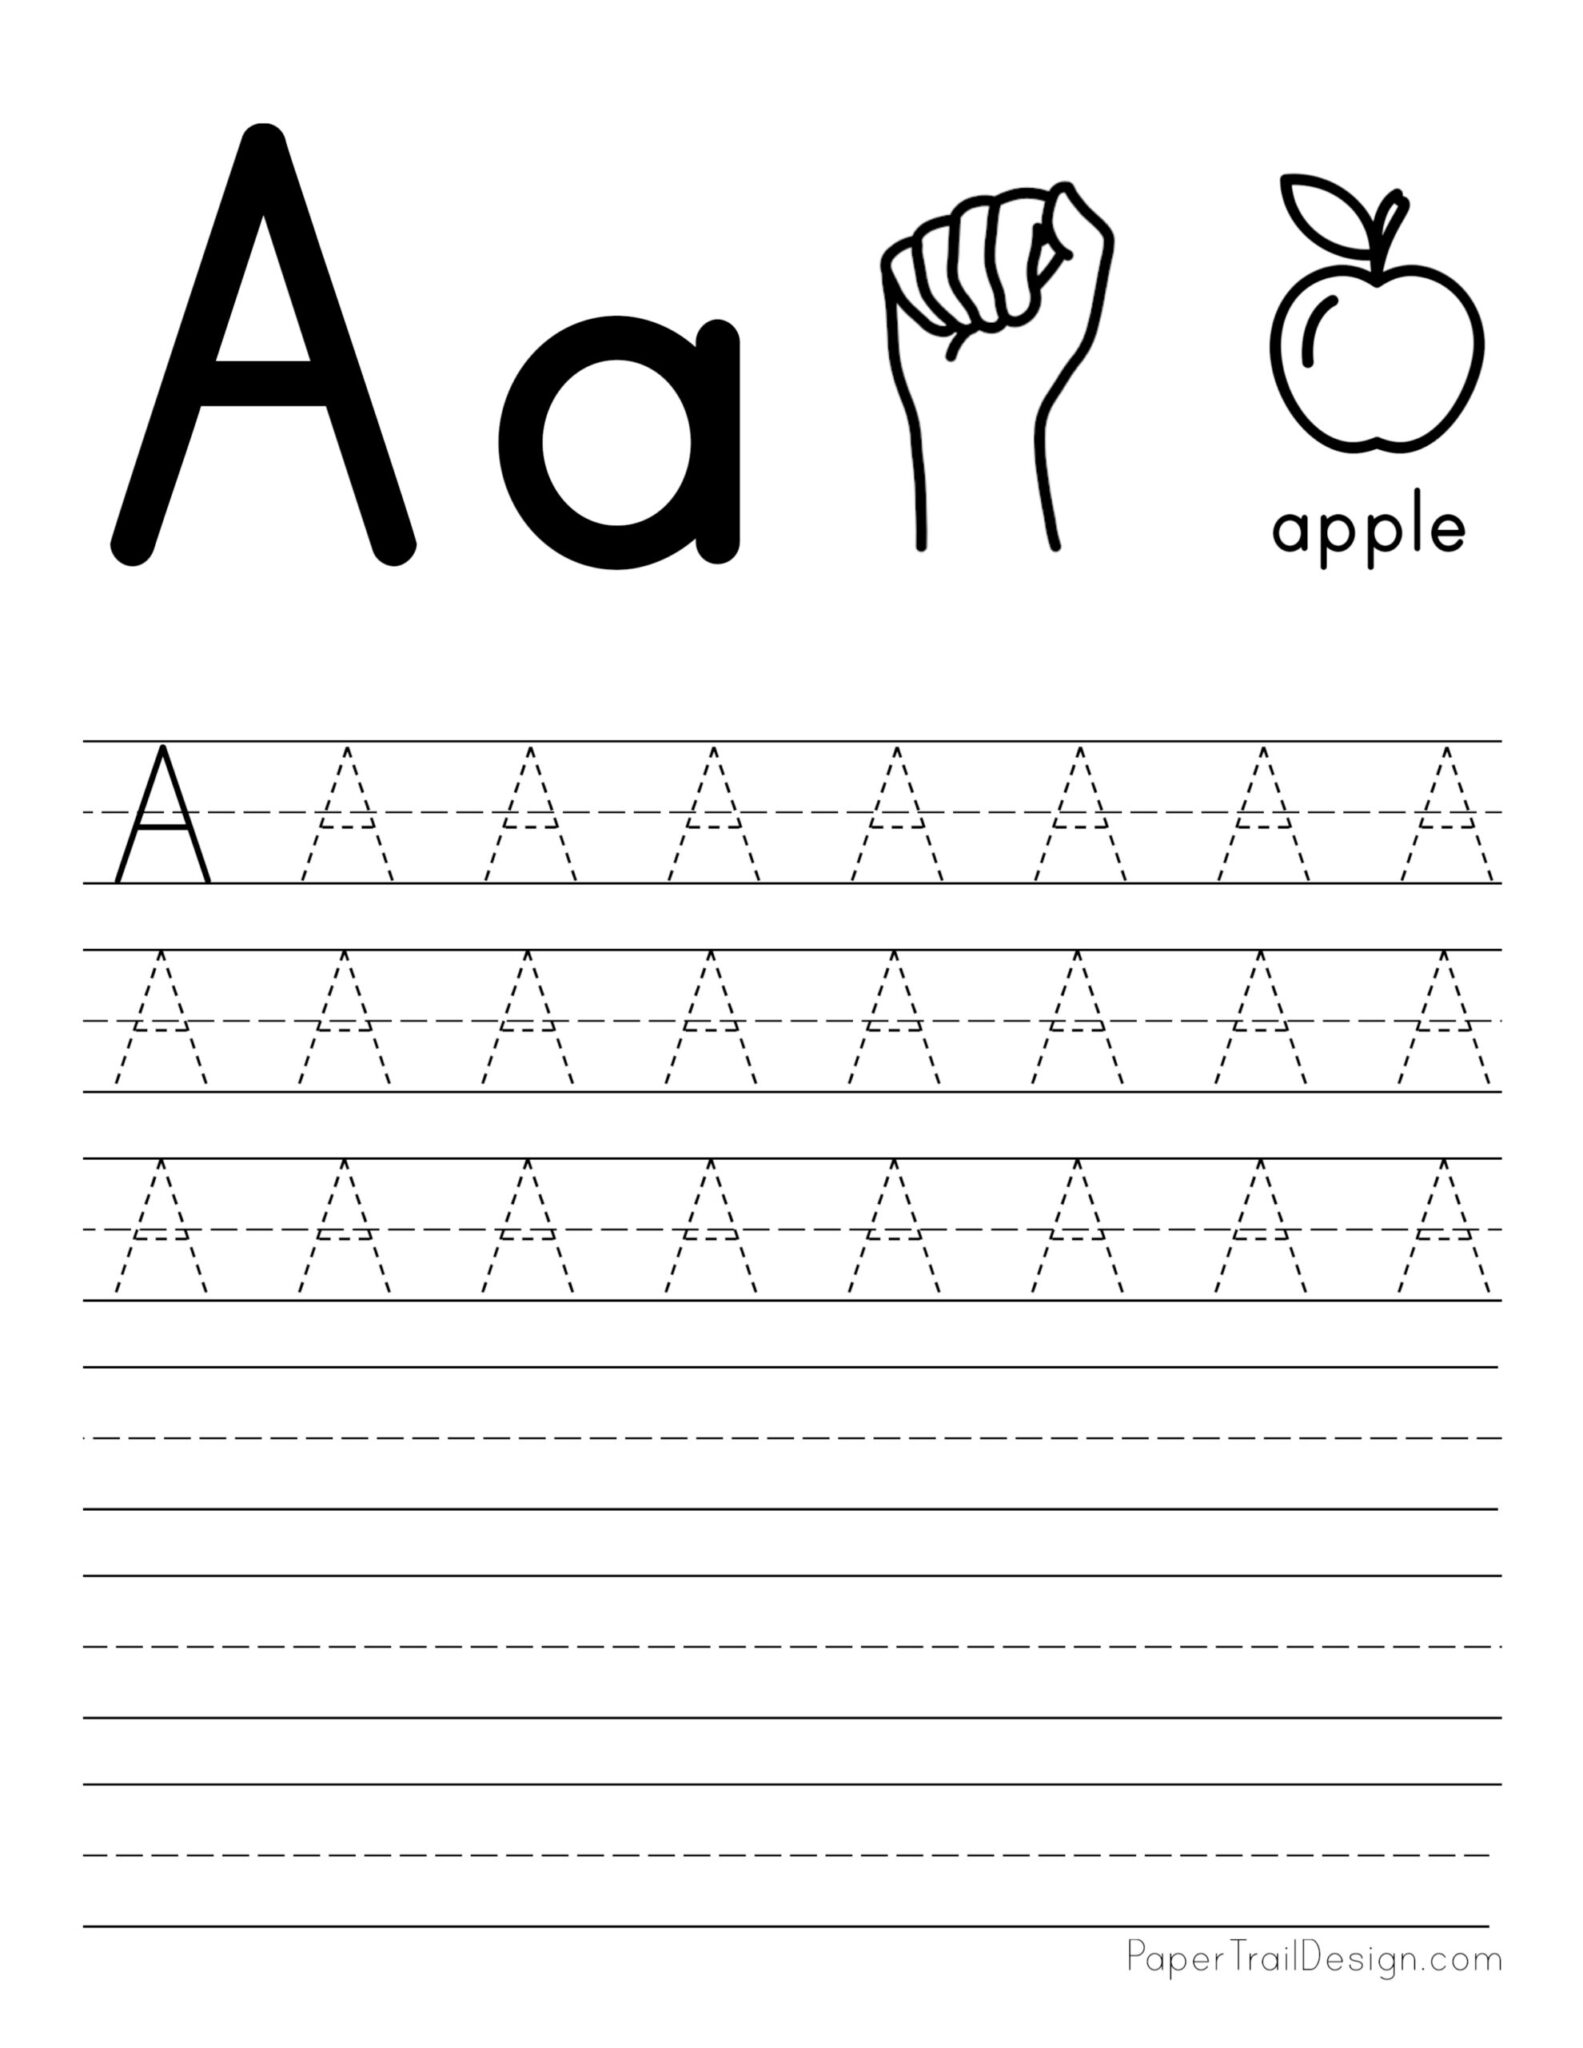 tracing-capital-letters-for-preschool-tracinglettersworksheetscom-tracing-capital-letters-for